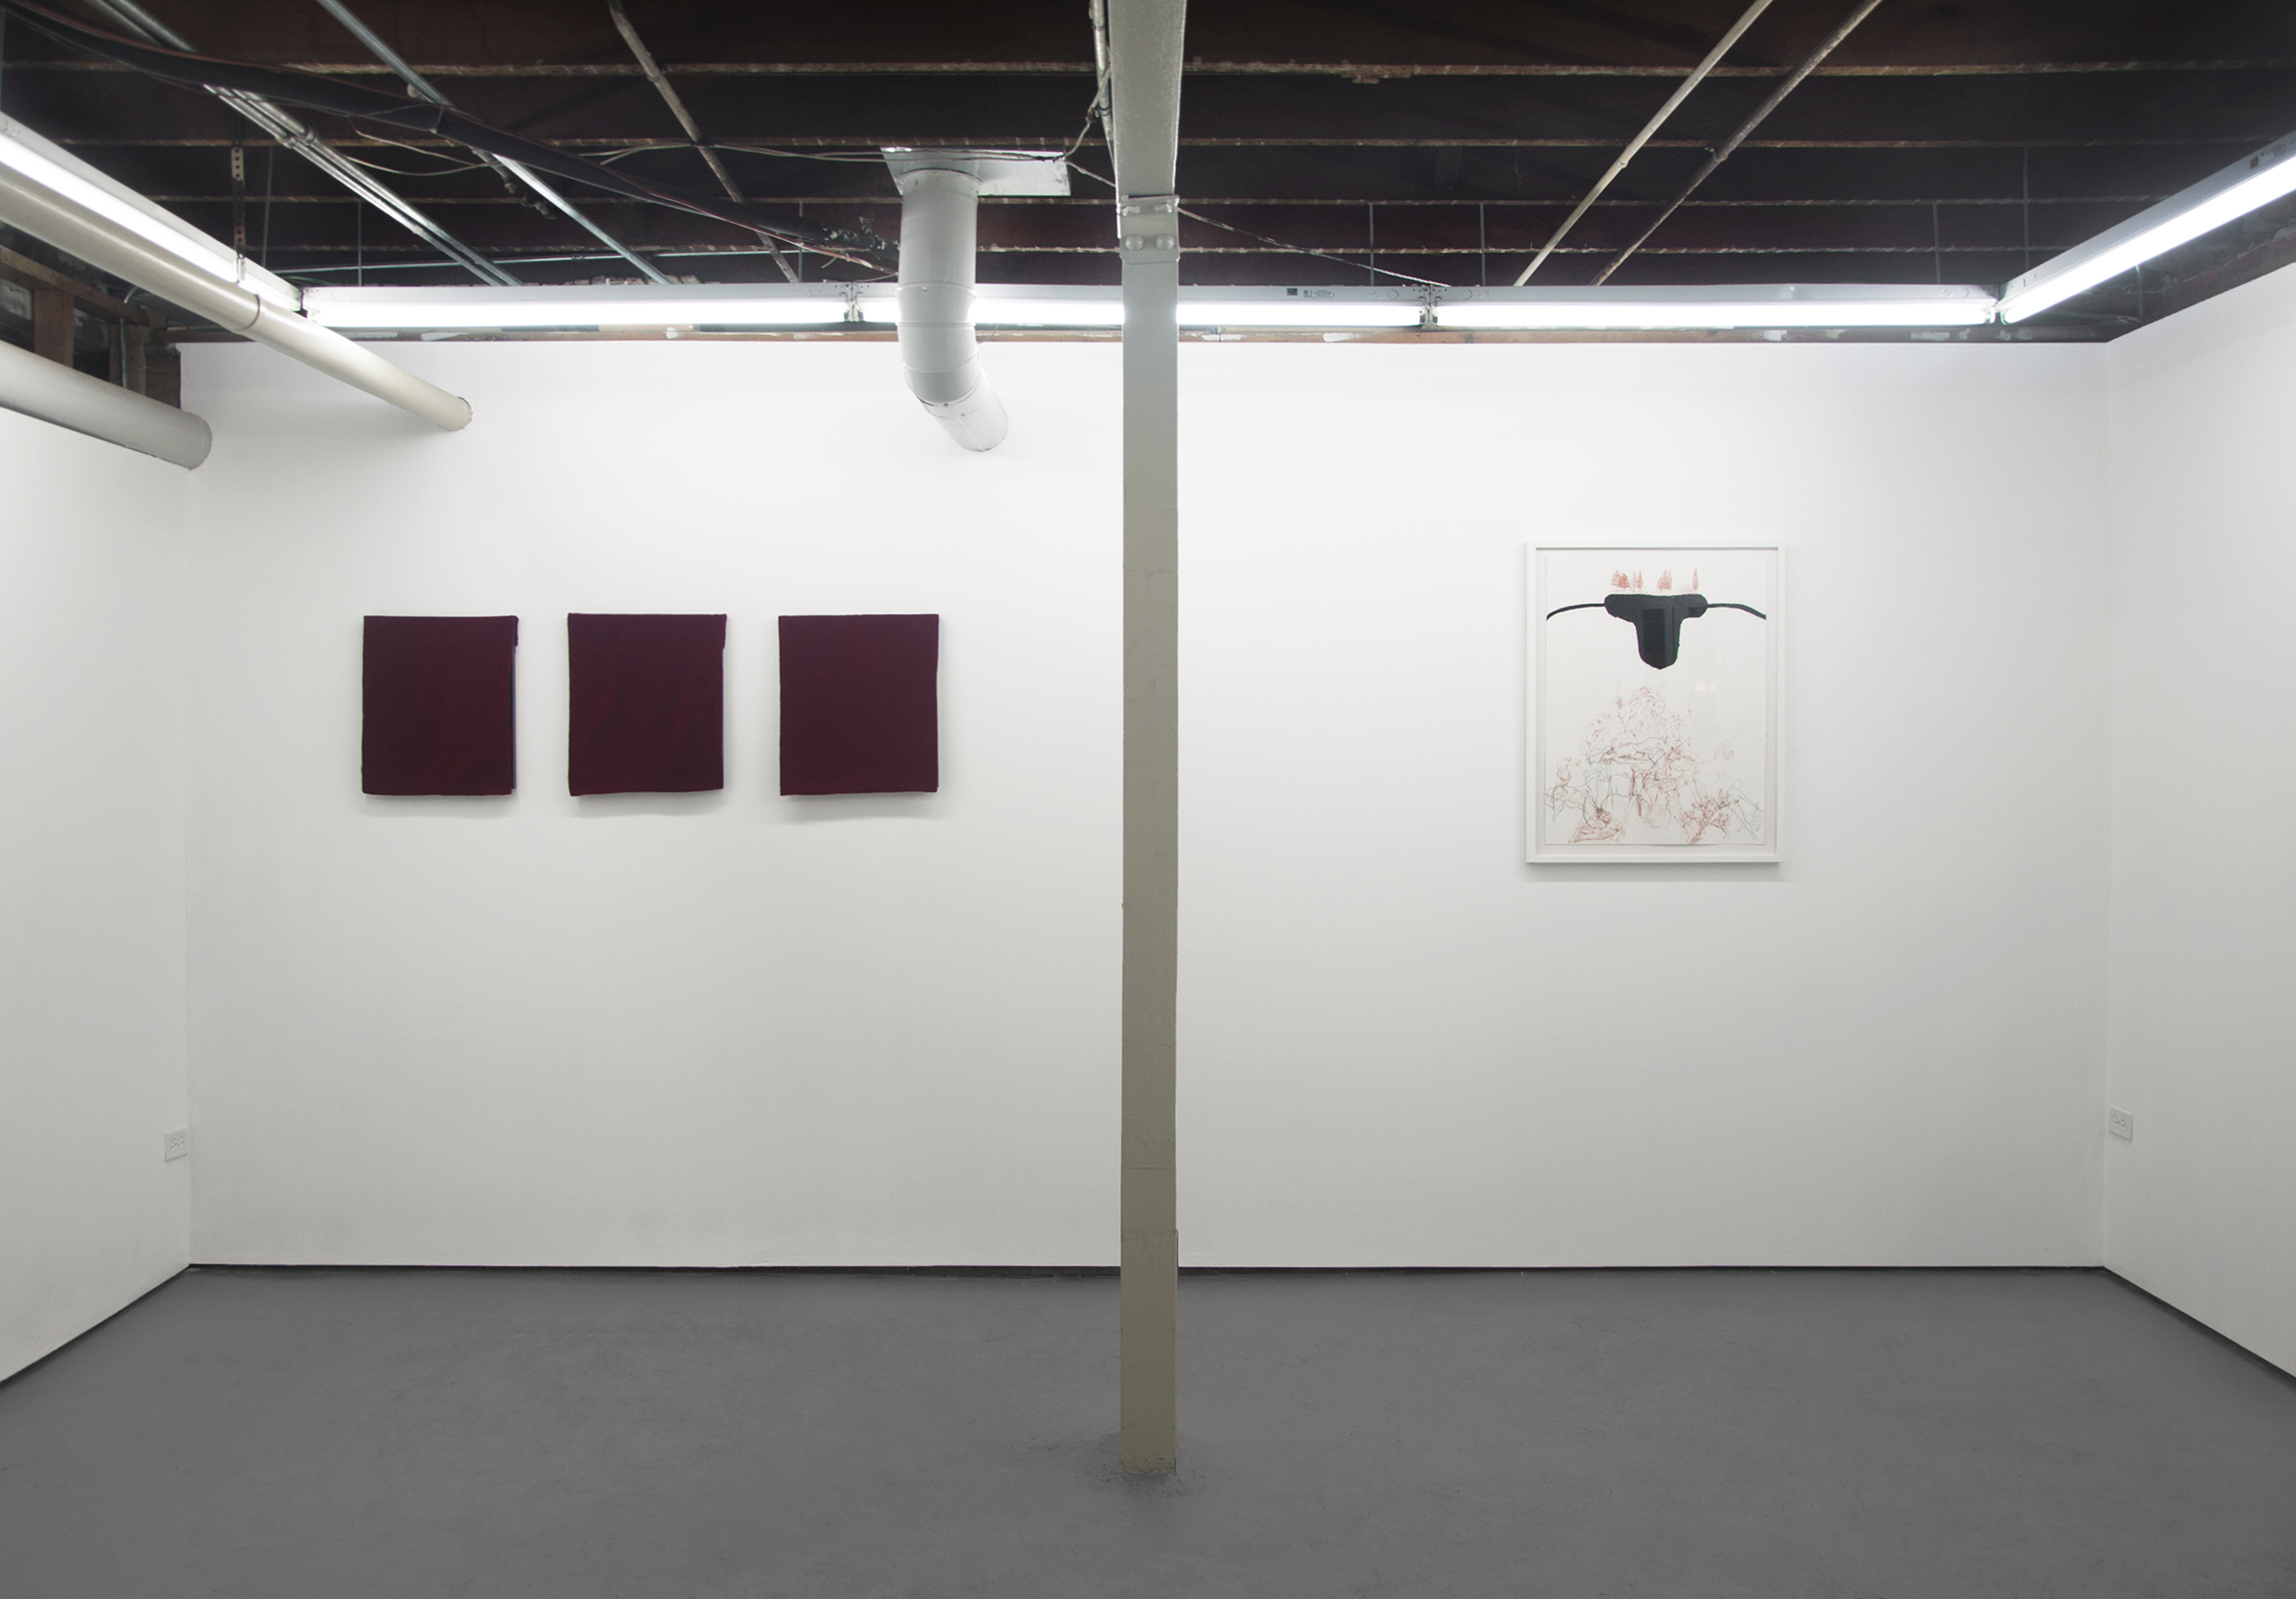 Frontward Tilt (from left to right), Jeremy Biles, “Ariadne's Thread”, 2015, digital print with graphite and wax crayon on newsprint with velvet veil; Jeremy Biles, “The Sensation of Time”, 2015, digital print with graphite, colored pencil, and collage on newsprint with velvet veil; Jeremy Biles, 2015, “Mirror of Tauromachy”, digital print with graphite, colored pencil, and semen on newsprint with velvet veil; Rebecca Walz + Ryan M. Pfeiffer, 2015, “The Annunciation”, Chalk Lead & Charcoal.